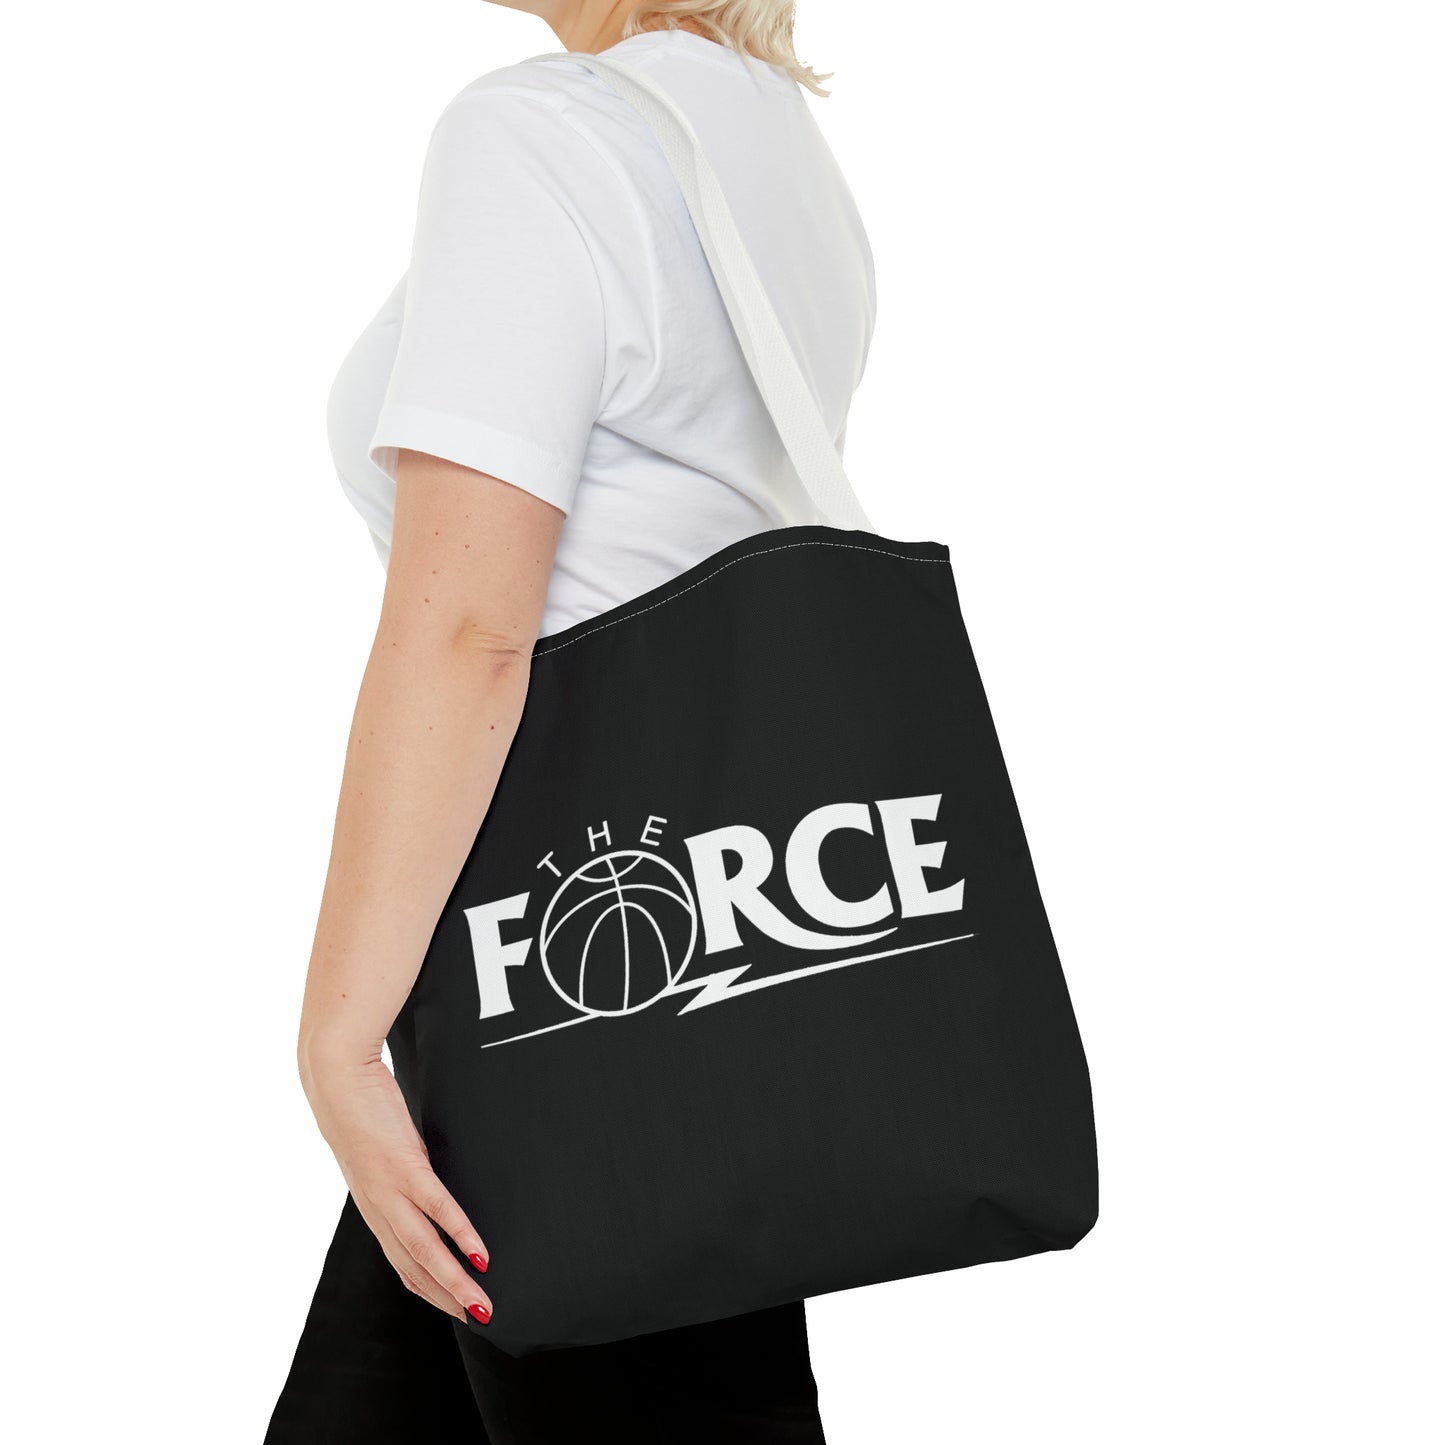 The Force Black Tote Bag (3 Sizes)